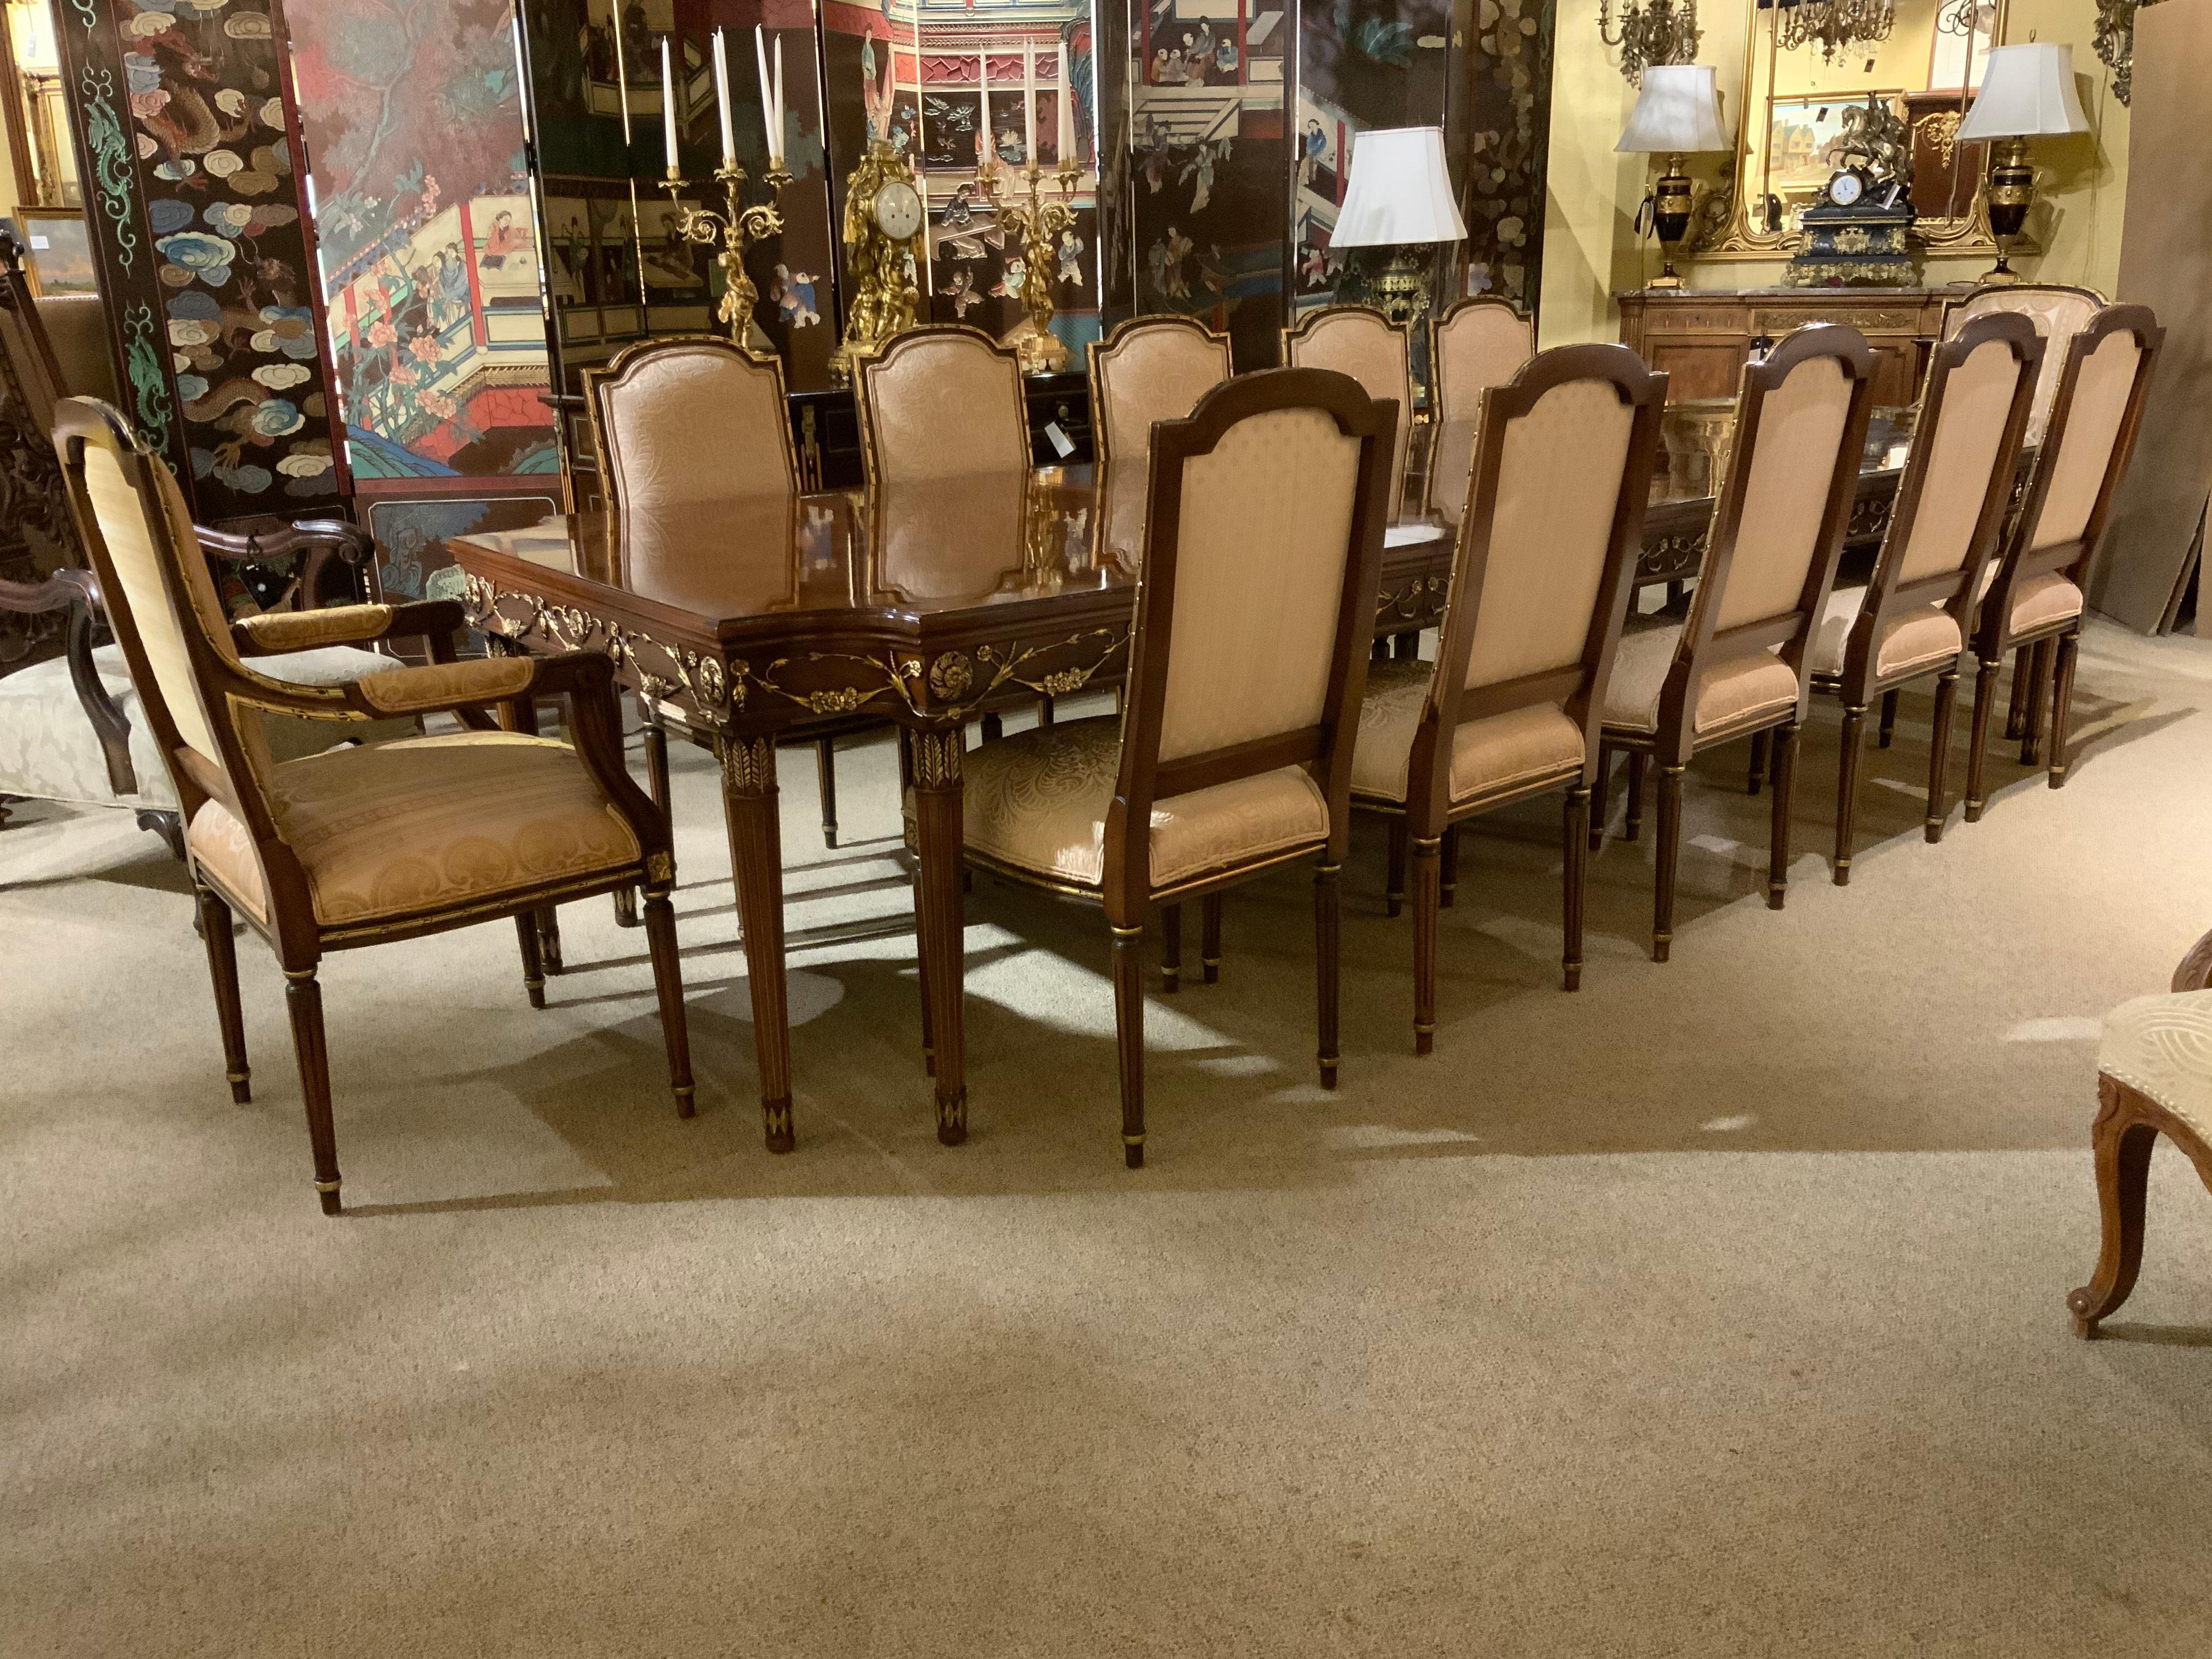 Exceptional dining suite consisting of a large table with inlay of patterned veneers and ebony
Border. The apron is beautifully embellished with raised gilt carvings in a foliate and leaf design 
Set consists of 10 side chairs and a host and